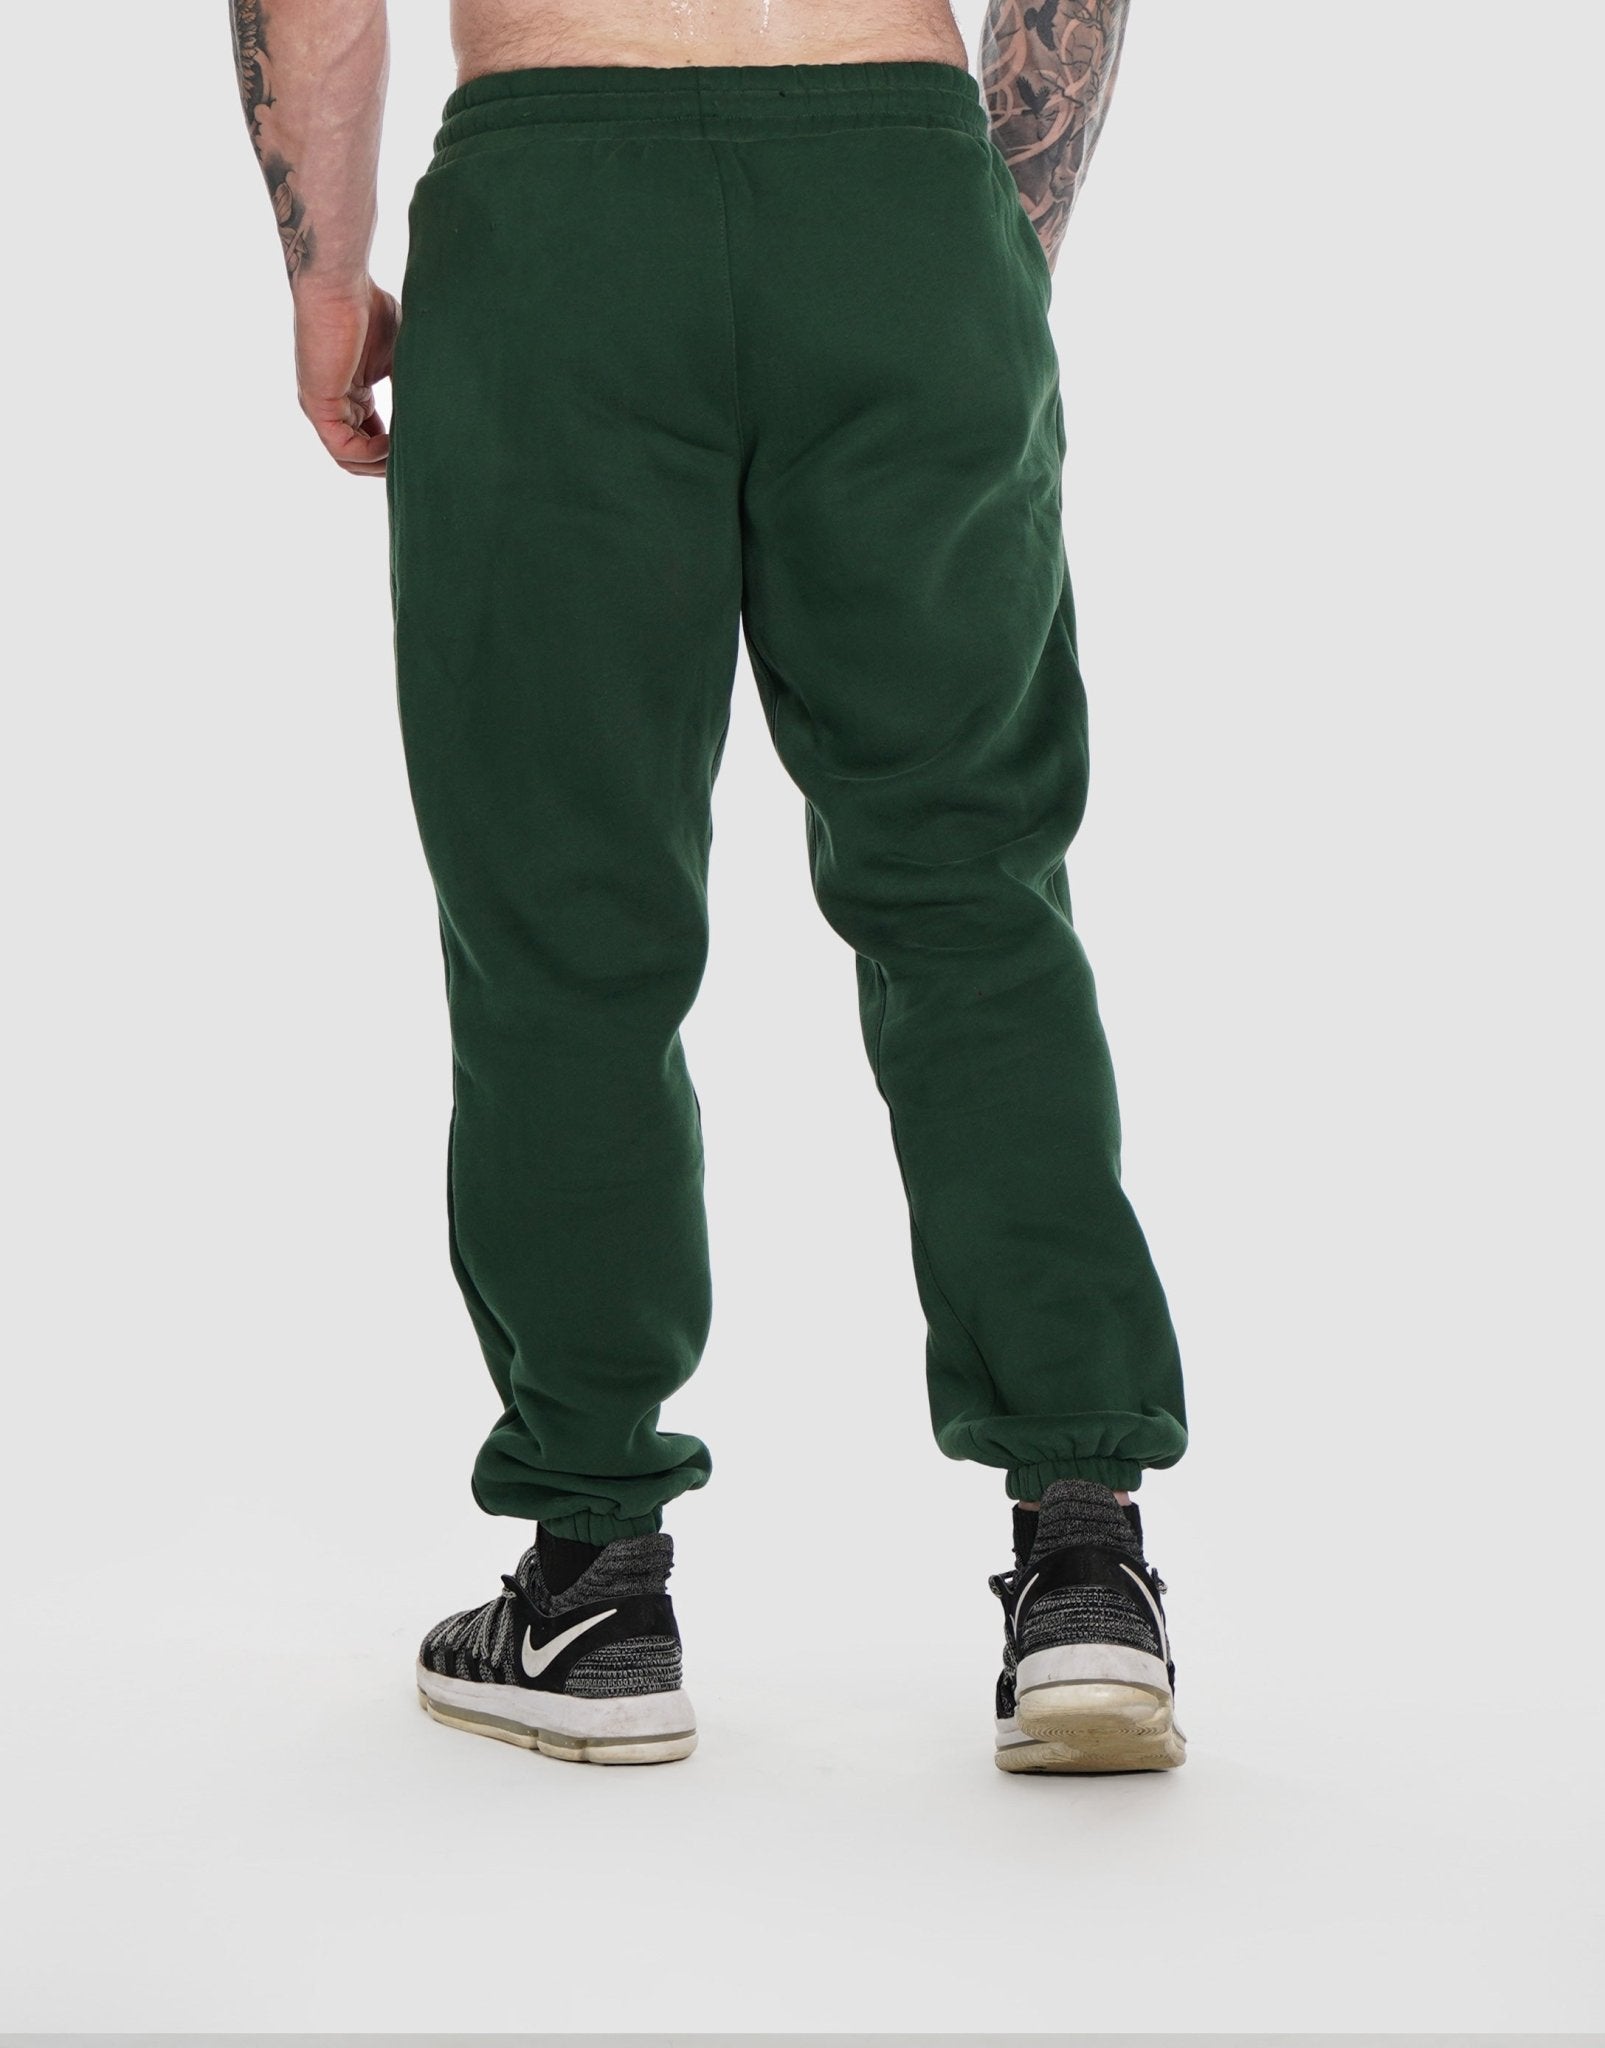 Major Win Distressed Joggers In Deep Forest • Impressions Online